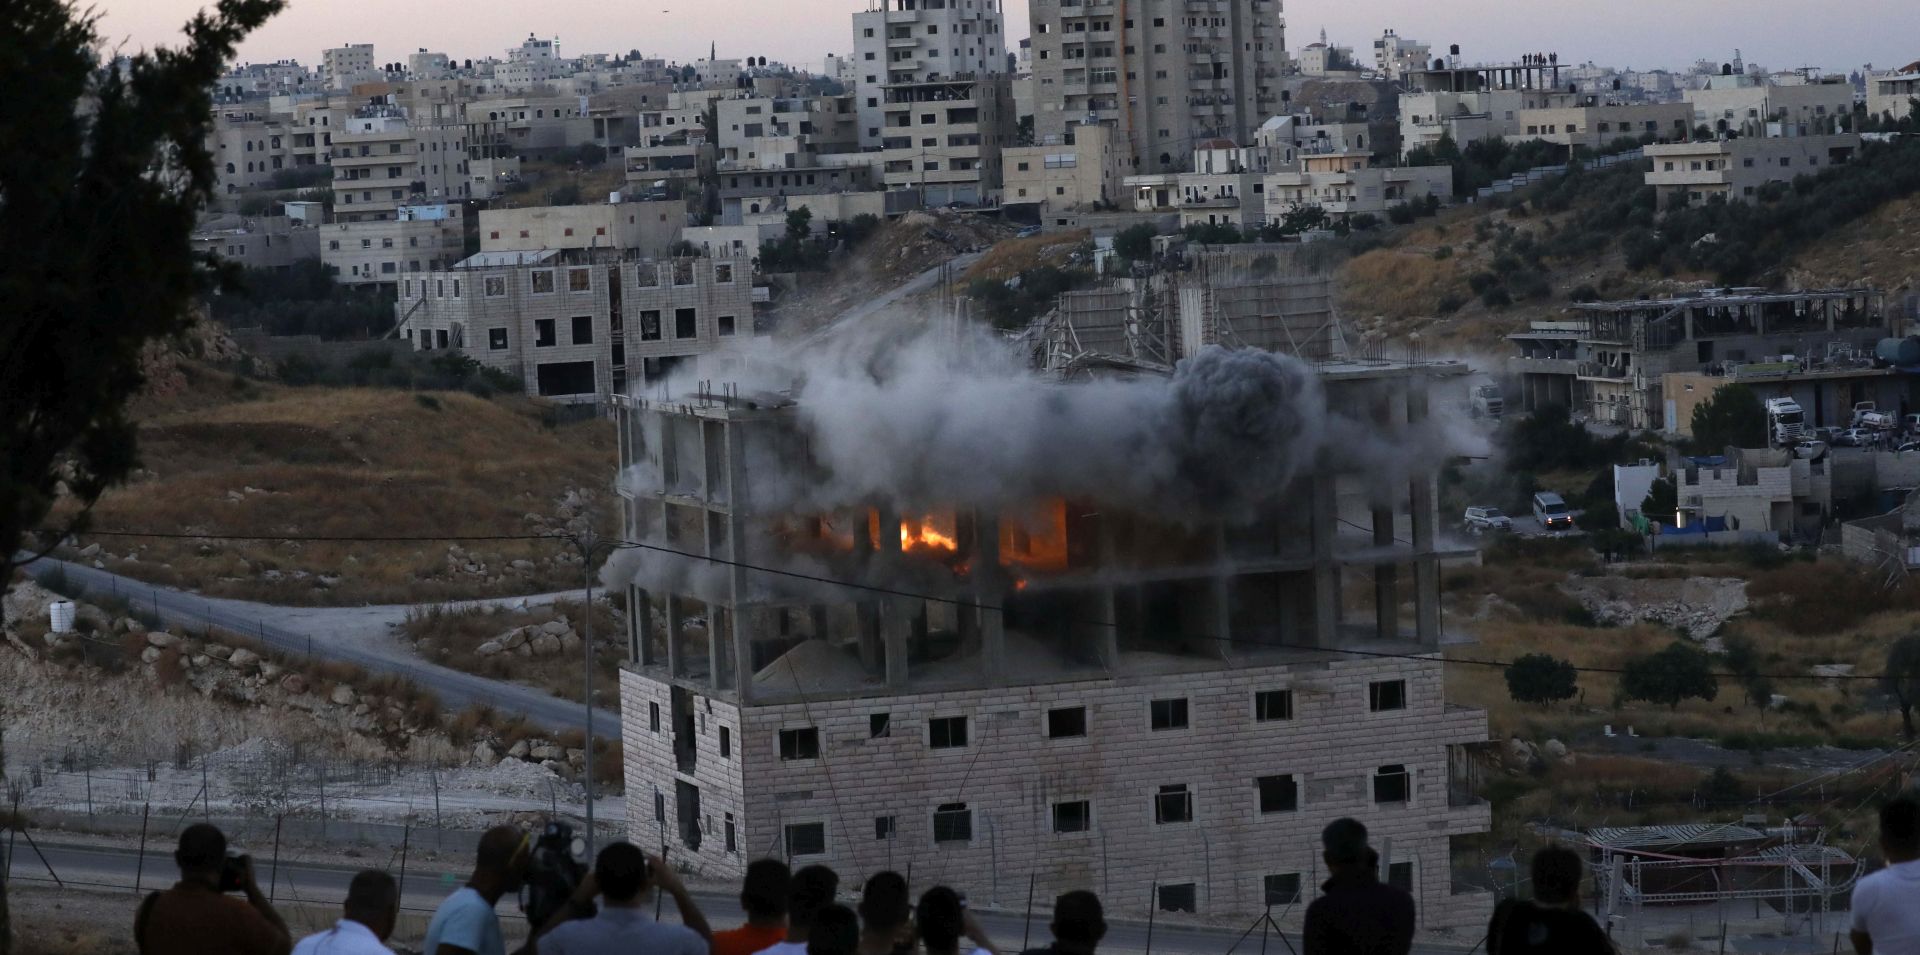 epa07733954 A Palestinian building is blown up by Israeli forces in the village of Sur Baher which sits on both sides of the Israeli barrier in East Jerusalem and the Israeli-occupied West Bank, 22 July 2019. Israeli authorities decided to demolish at least six Palestinian residential buildings housing lots of Palestinian families. The Israeli military announced the buildings were close to the West Bank separation barrier.  EPA/ABED AL HASHLAMOUN